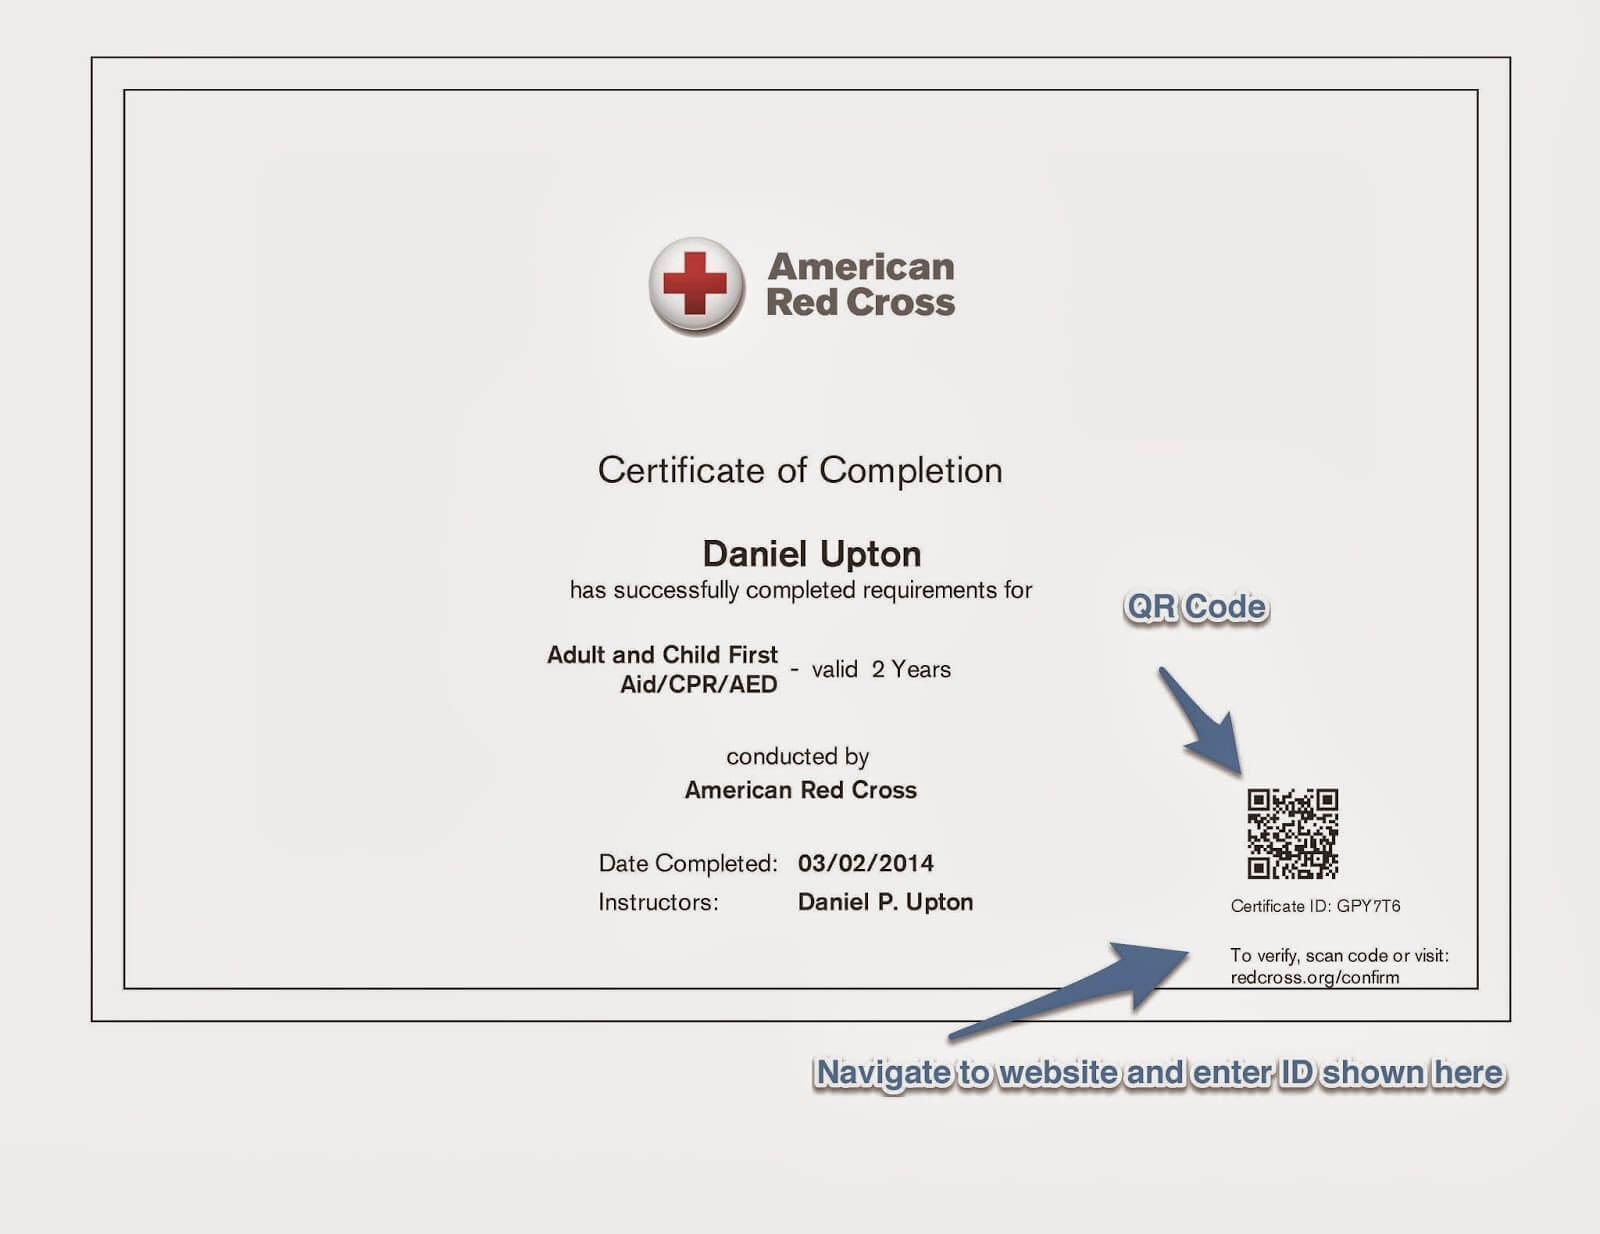 American Red Cross Cpr Card Template ] – Aha Training Center Inside Cpr Card Template